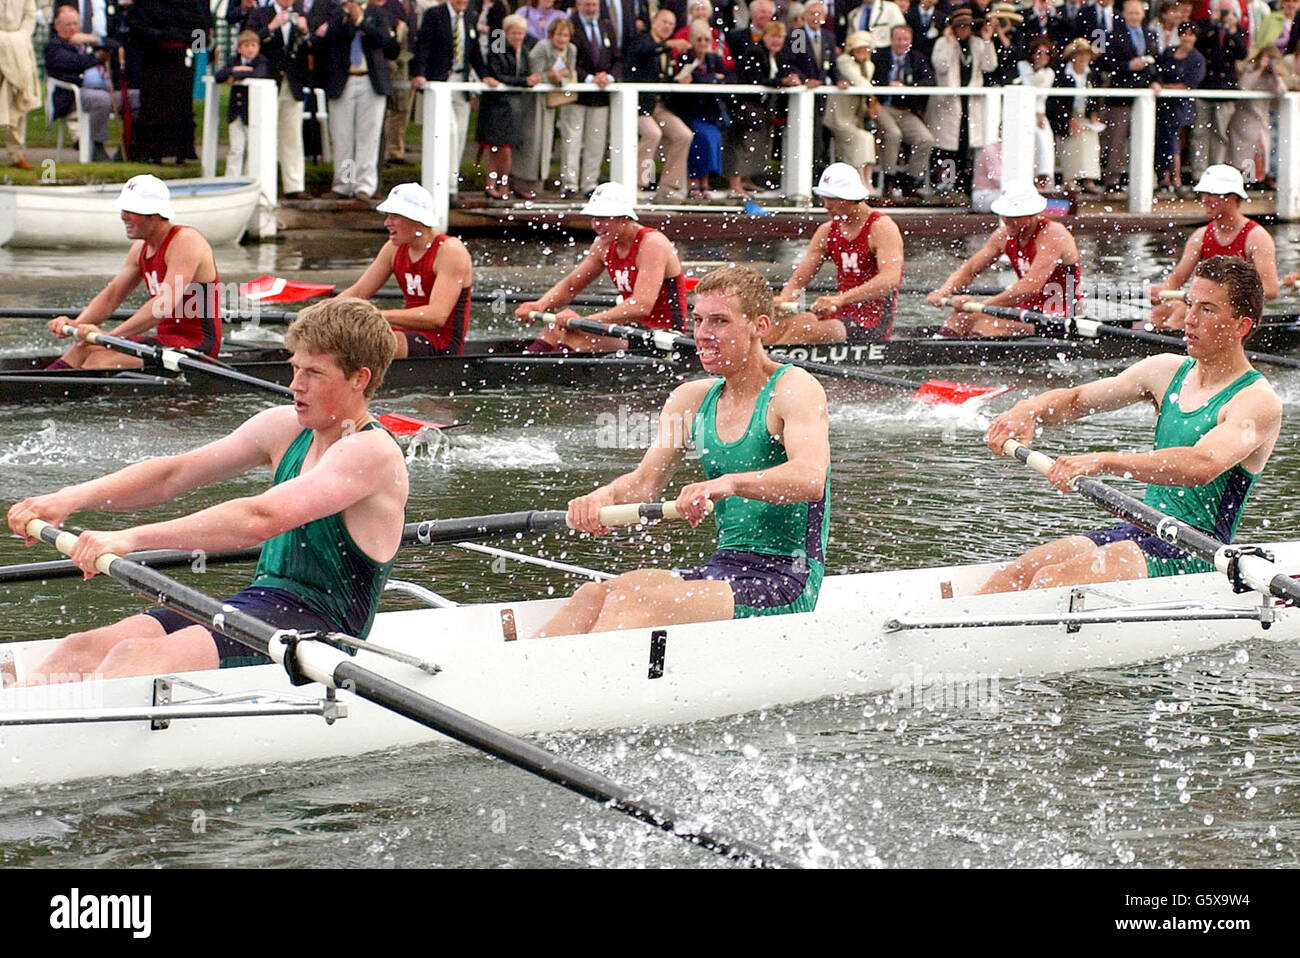 Royal Grammer School Worcester (green foreground) in action against Middlesex School USA in the Princess Elizabeth Challenge Cup at the 153rd Henley Royal Regatta. Fans braved chilly weather and showers to quaff champagne by the river bank and watch the rowers glide by. Stock Photo